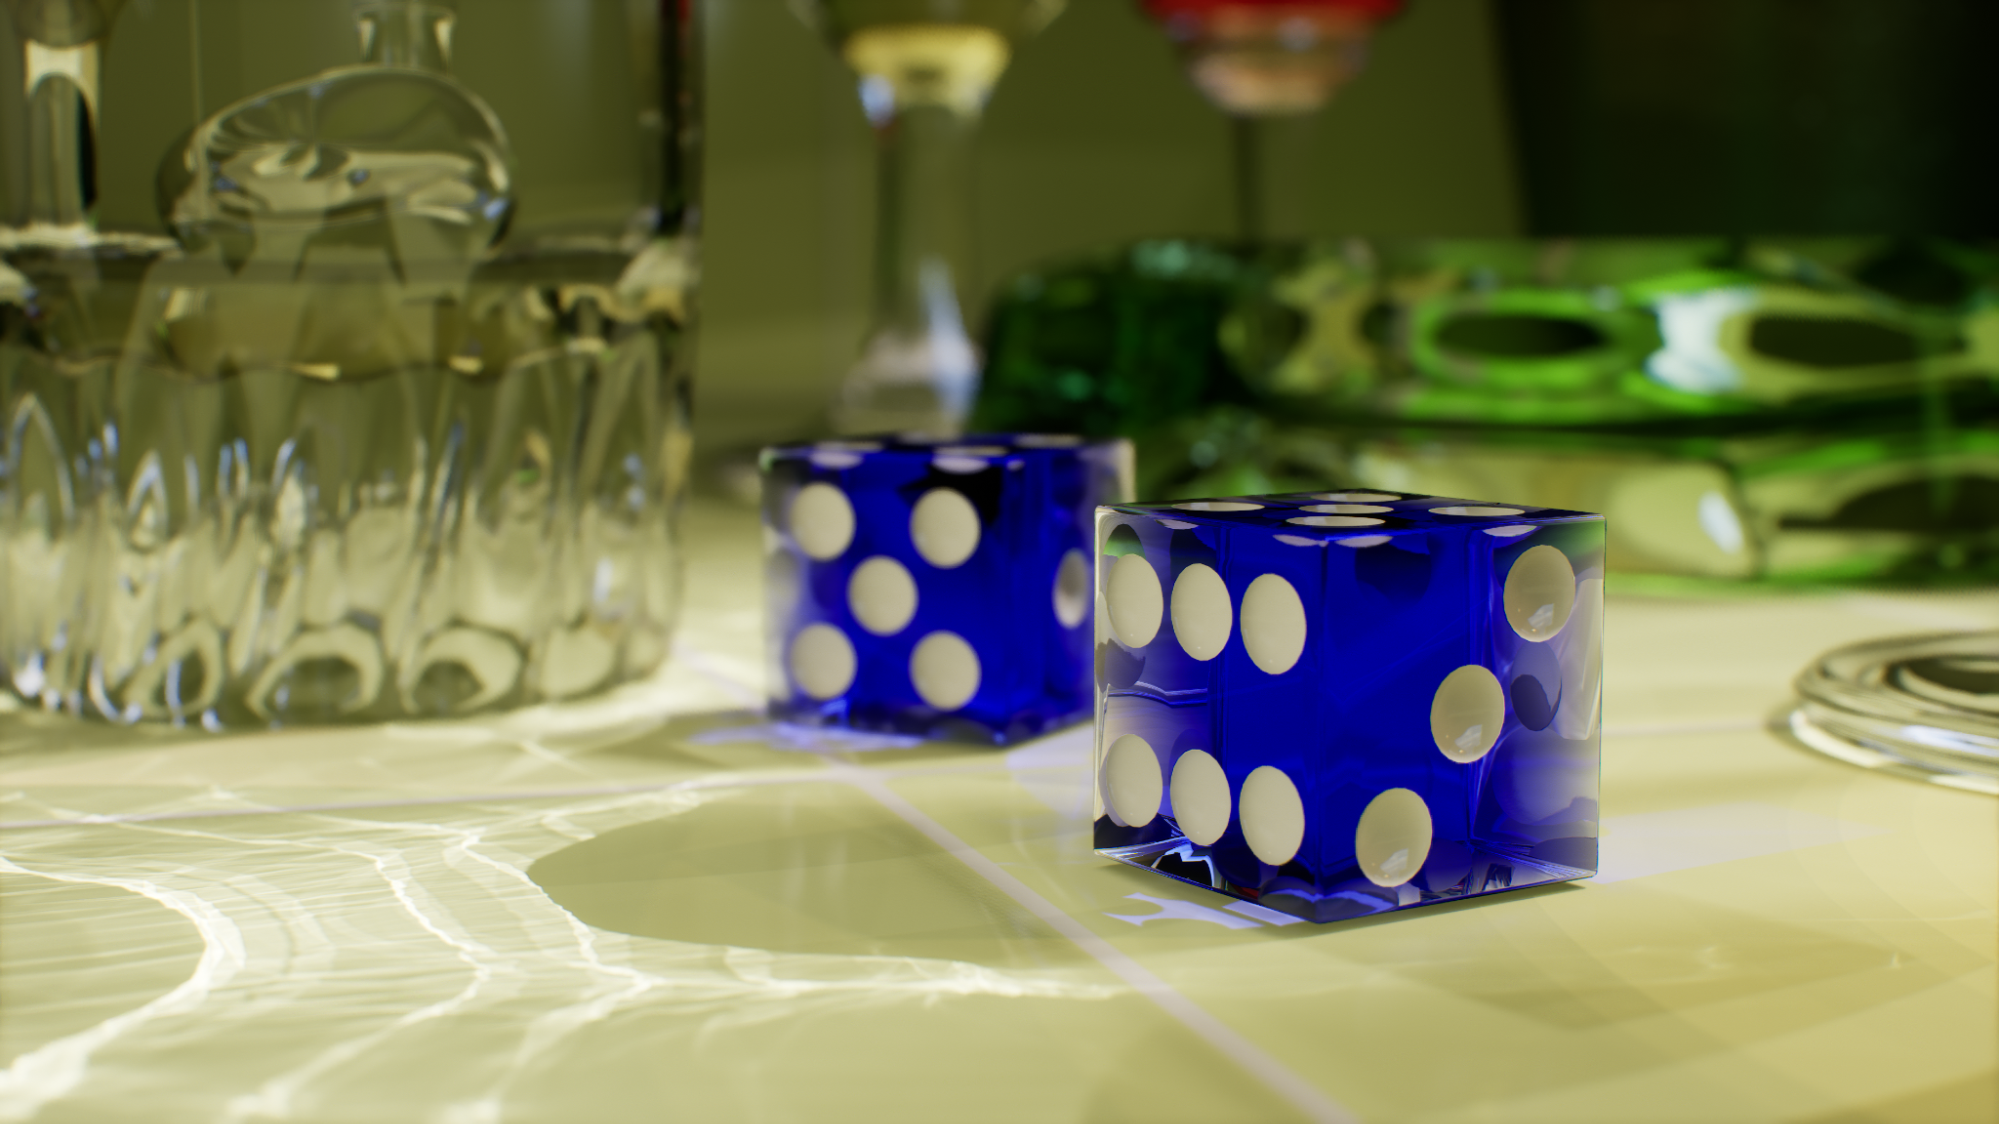 Close up caustics ray-traced depth of field image of translucent blue dice on table surrounded by glass objects.